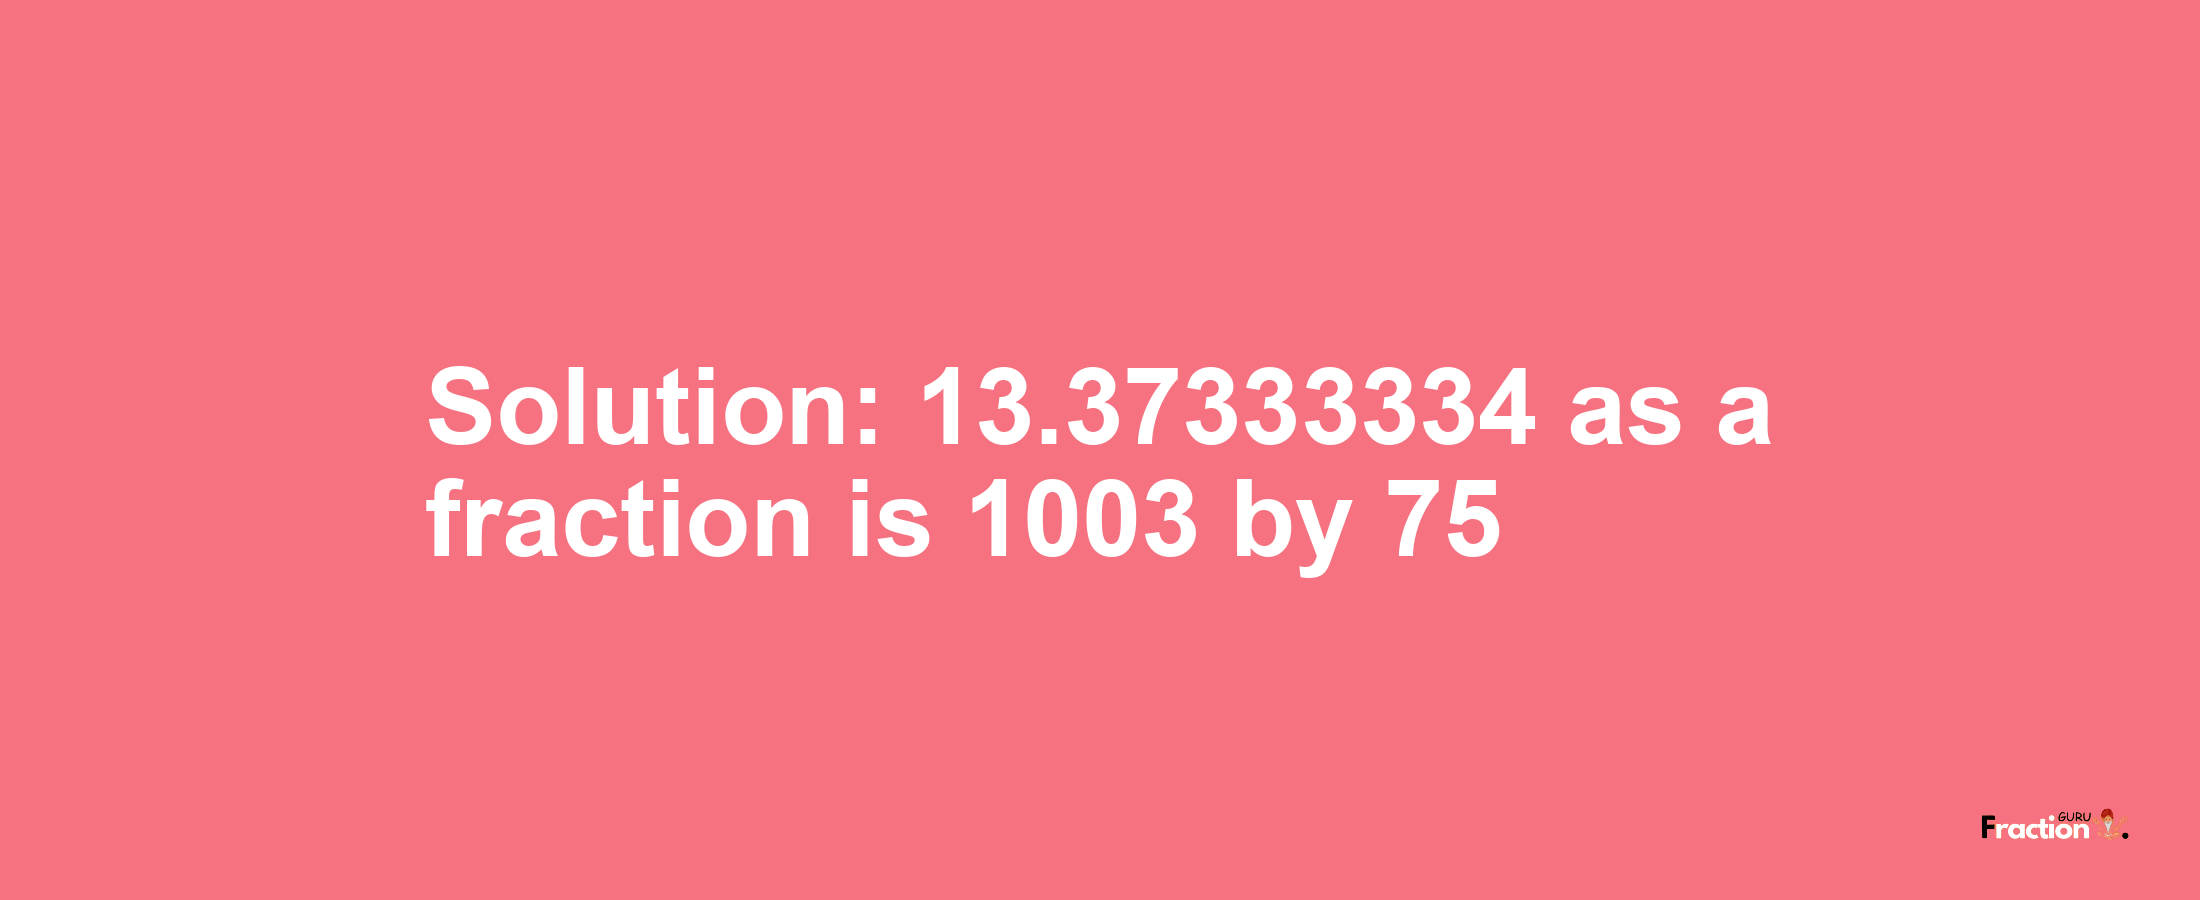 Solution:13.37333334 as a fraction is 1003/75